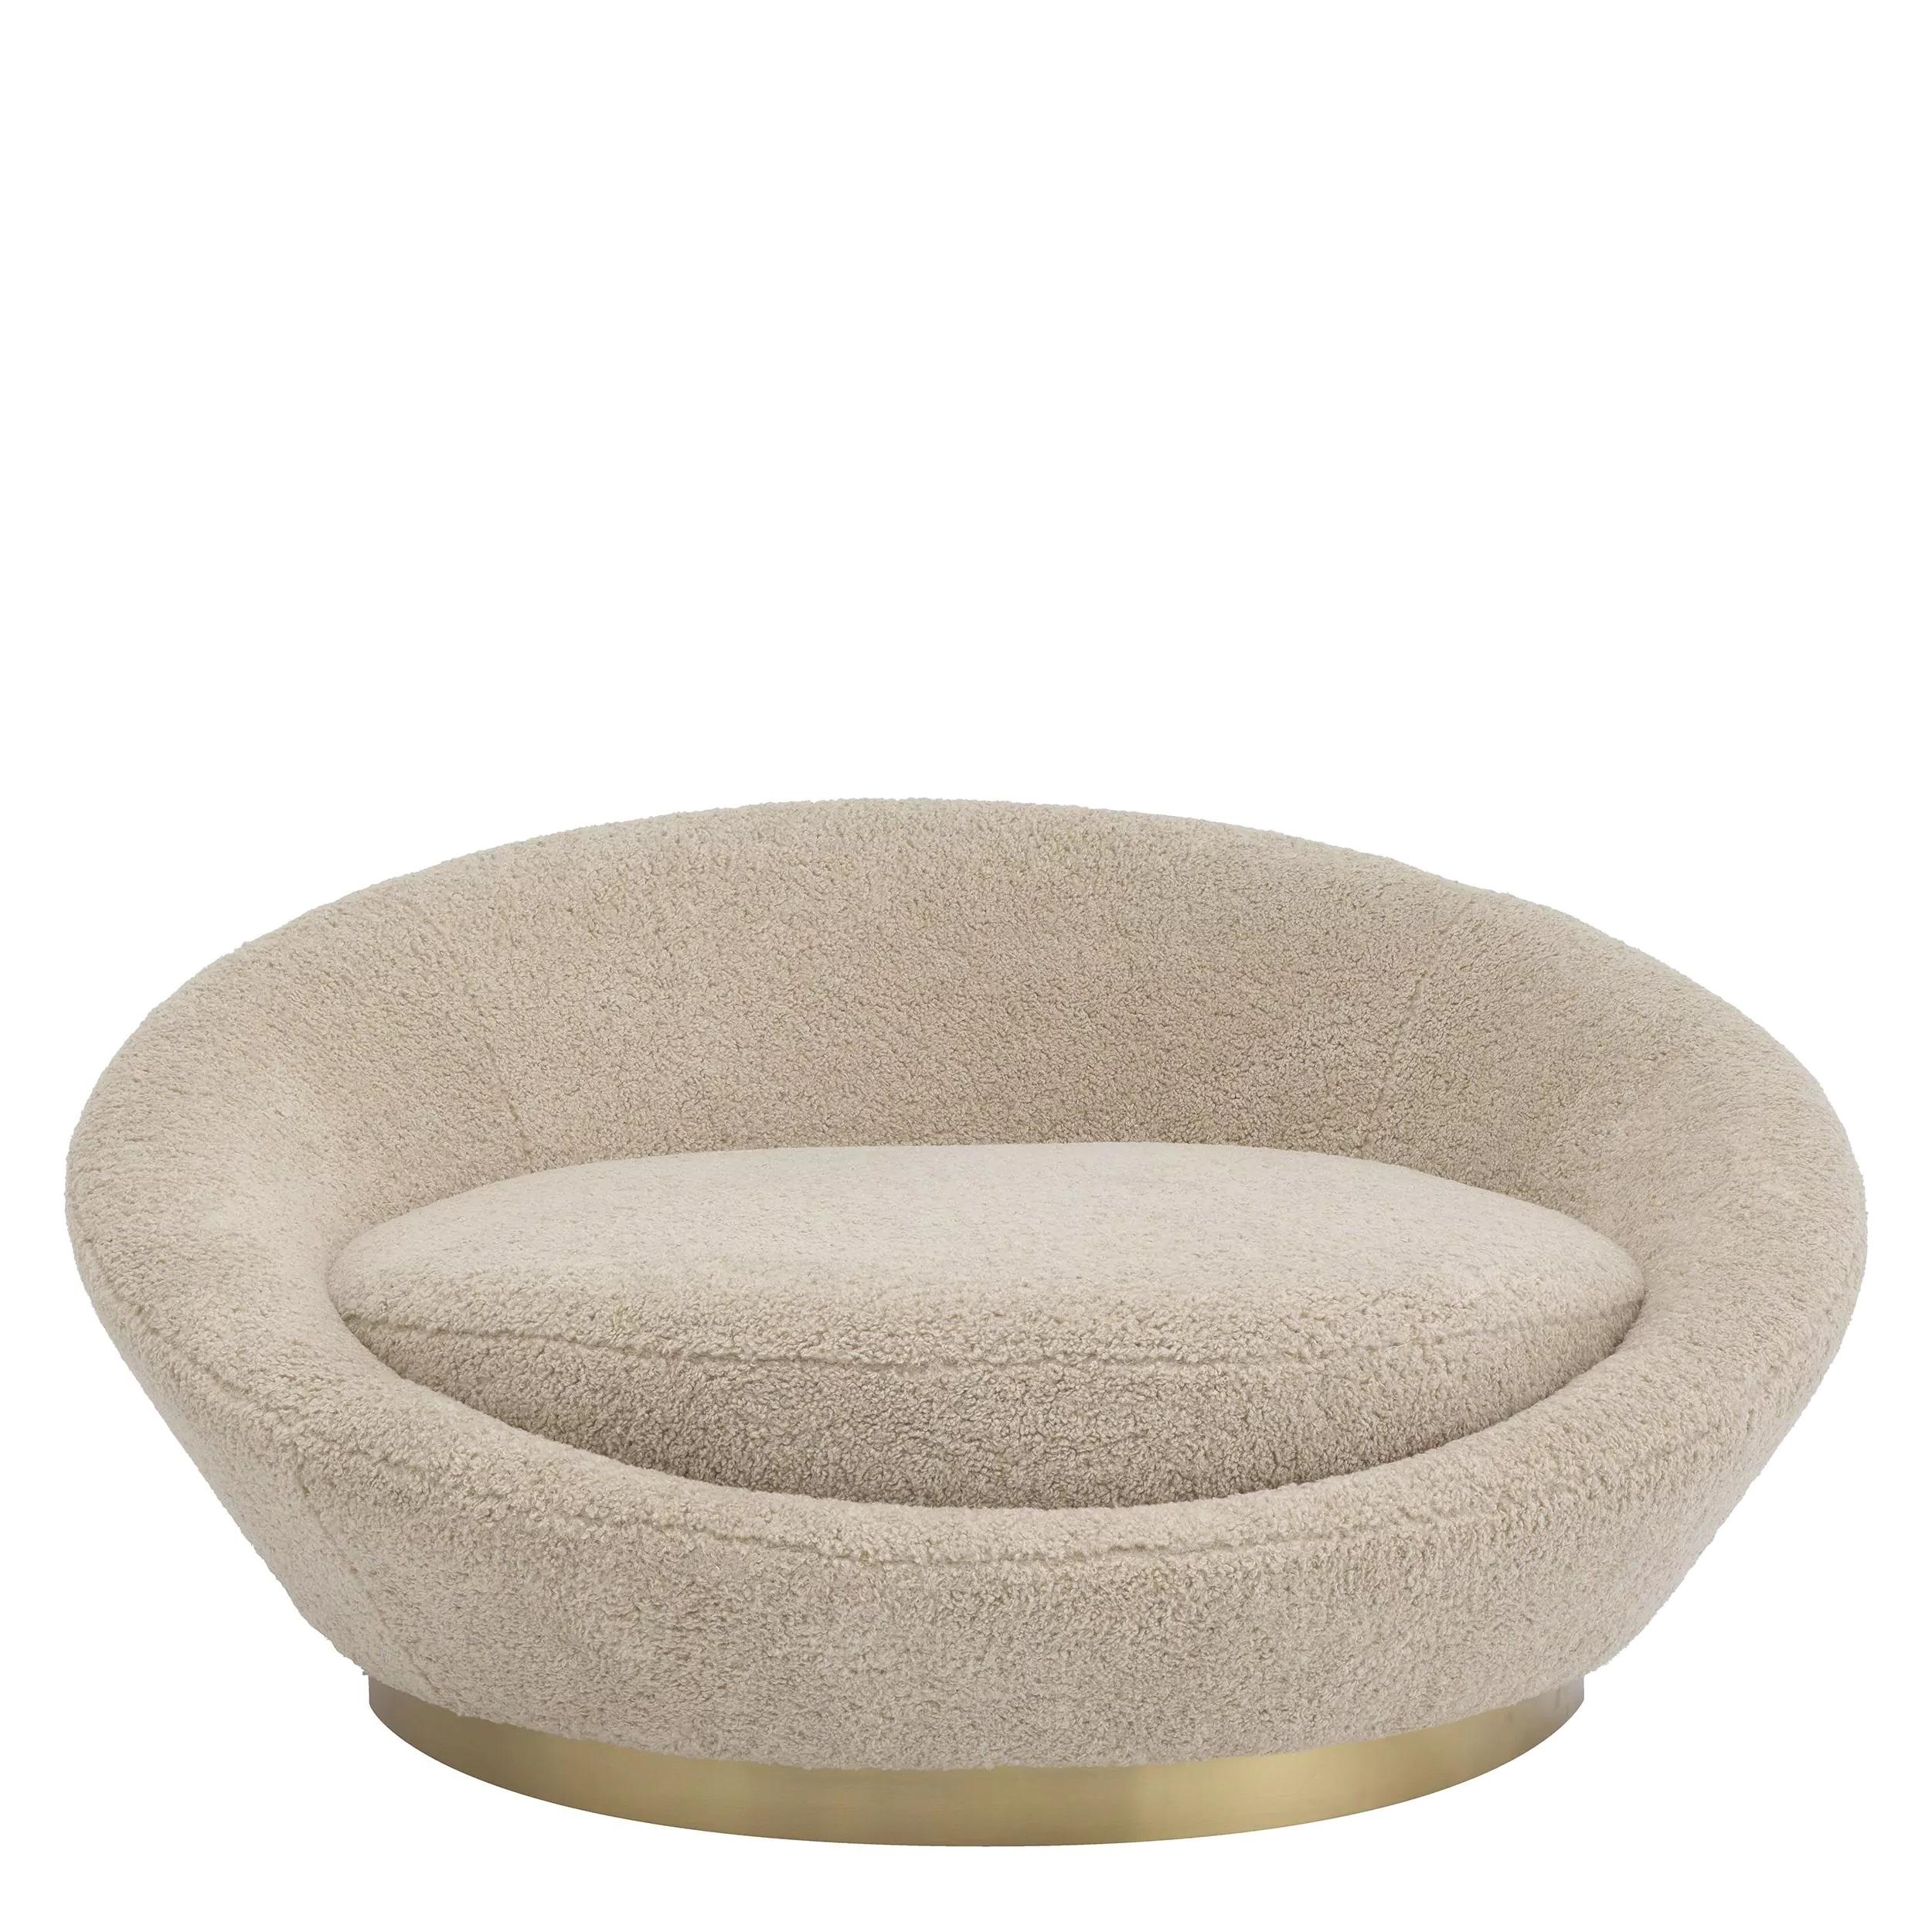 Welcoming and round shaped large armchair or sofa in bouclé fabric and brass finishes base.